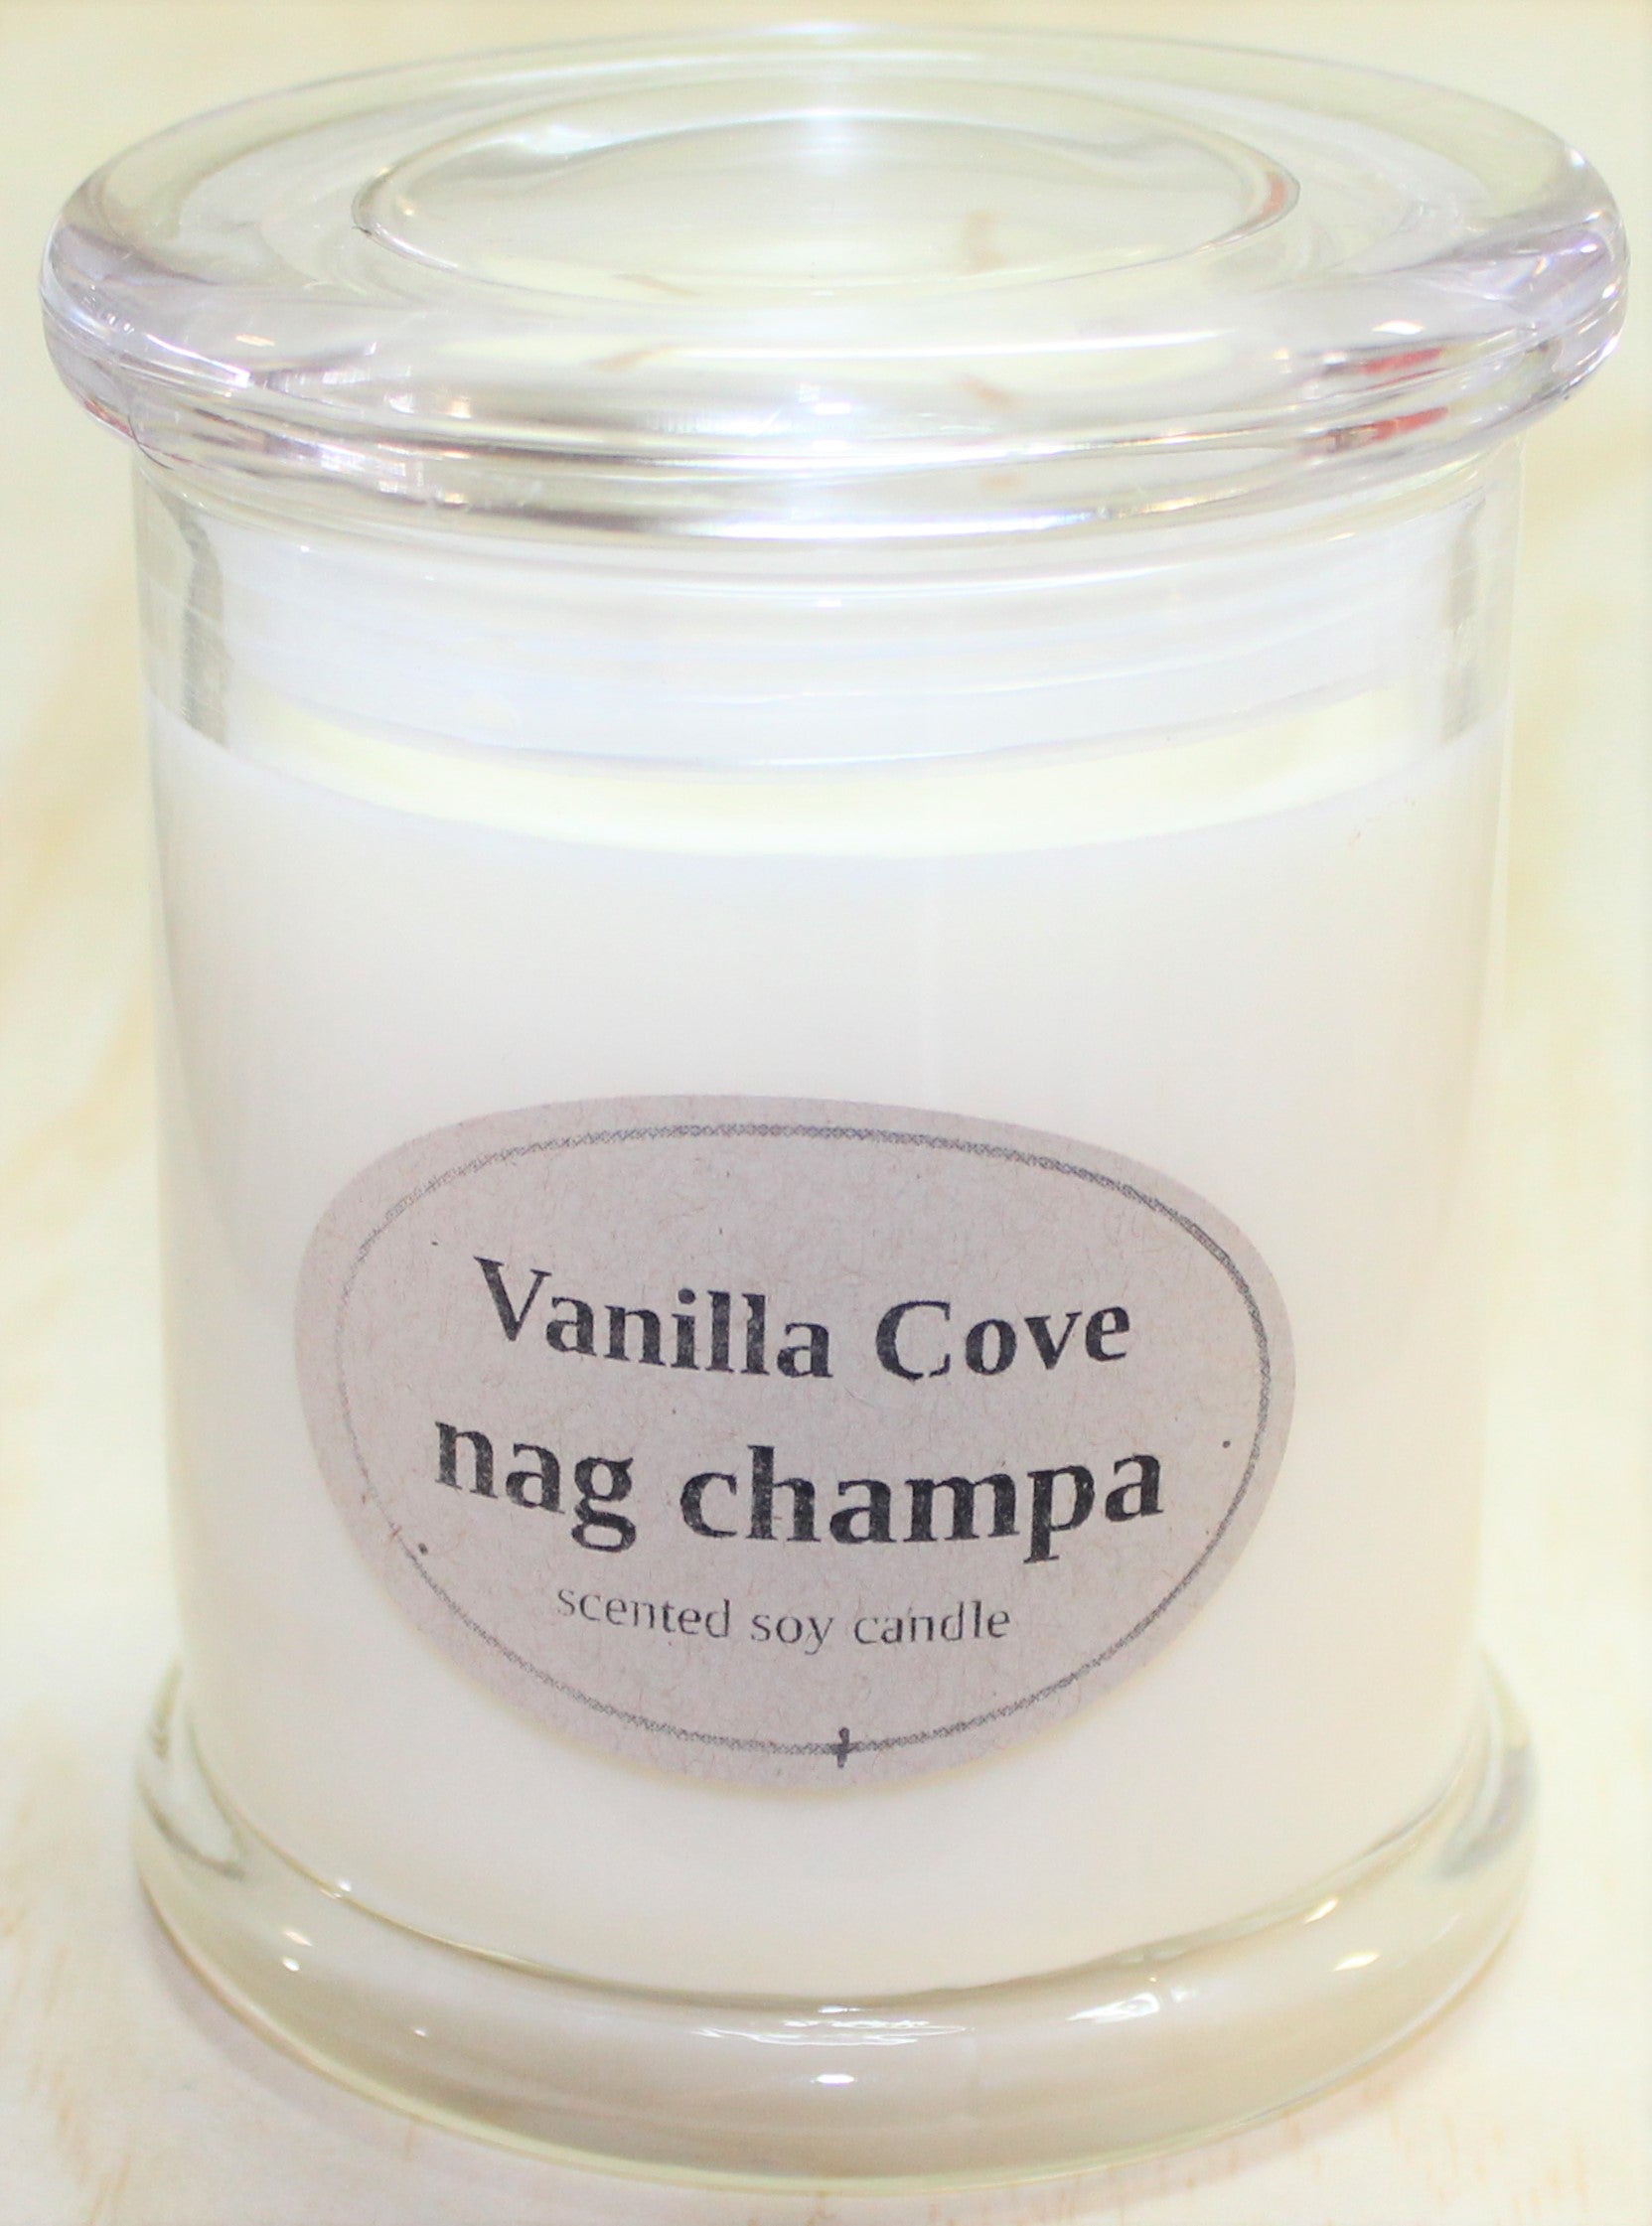 Vanilla Cove Soy Candle 50 hour Nag Champa Fragrance in clear glass jar and glass lid